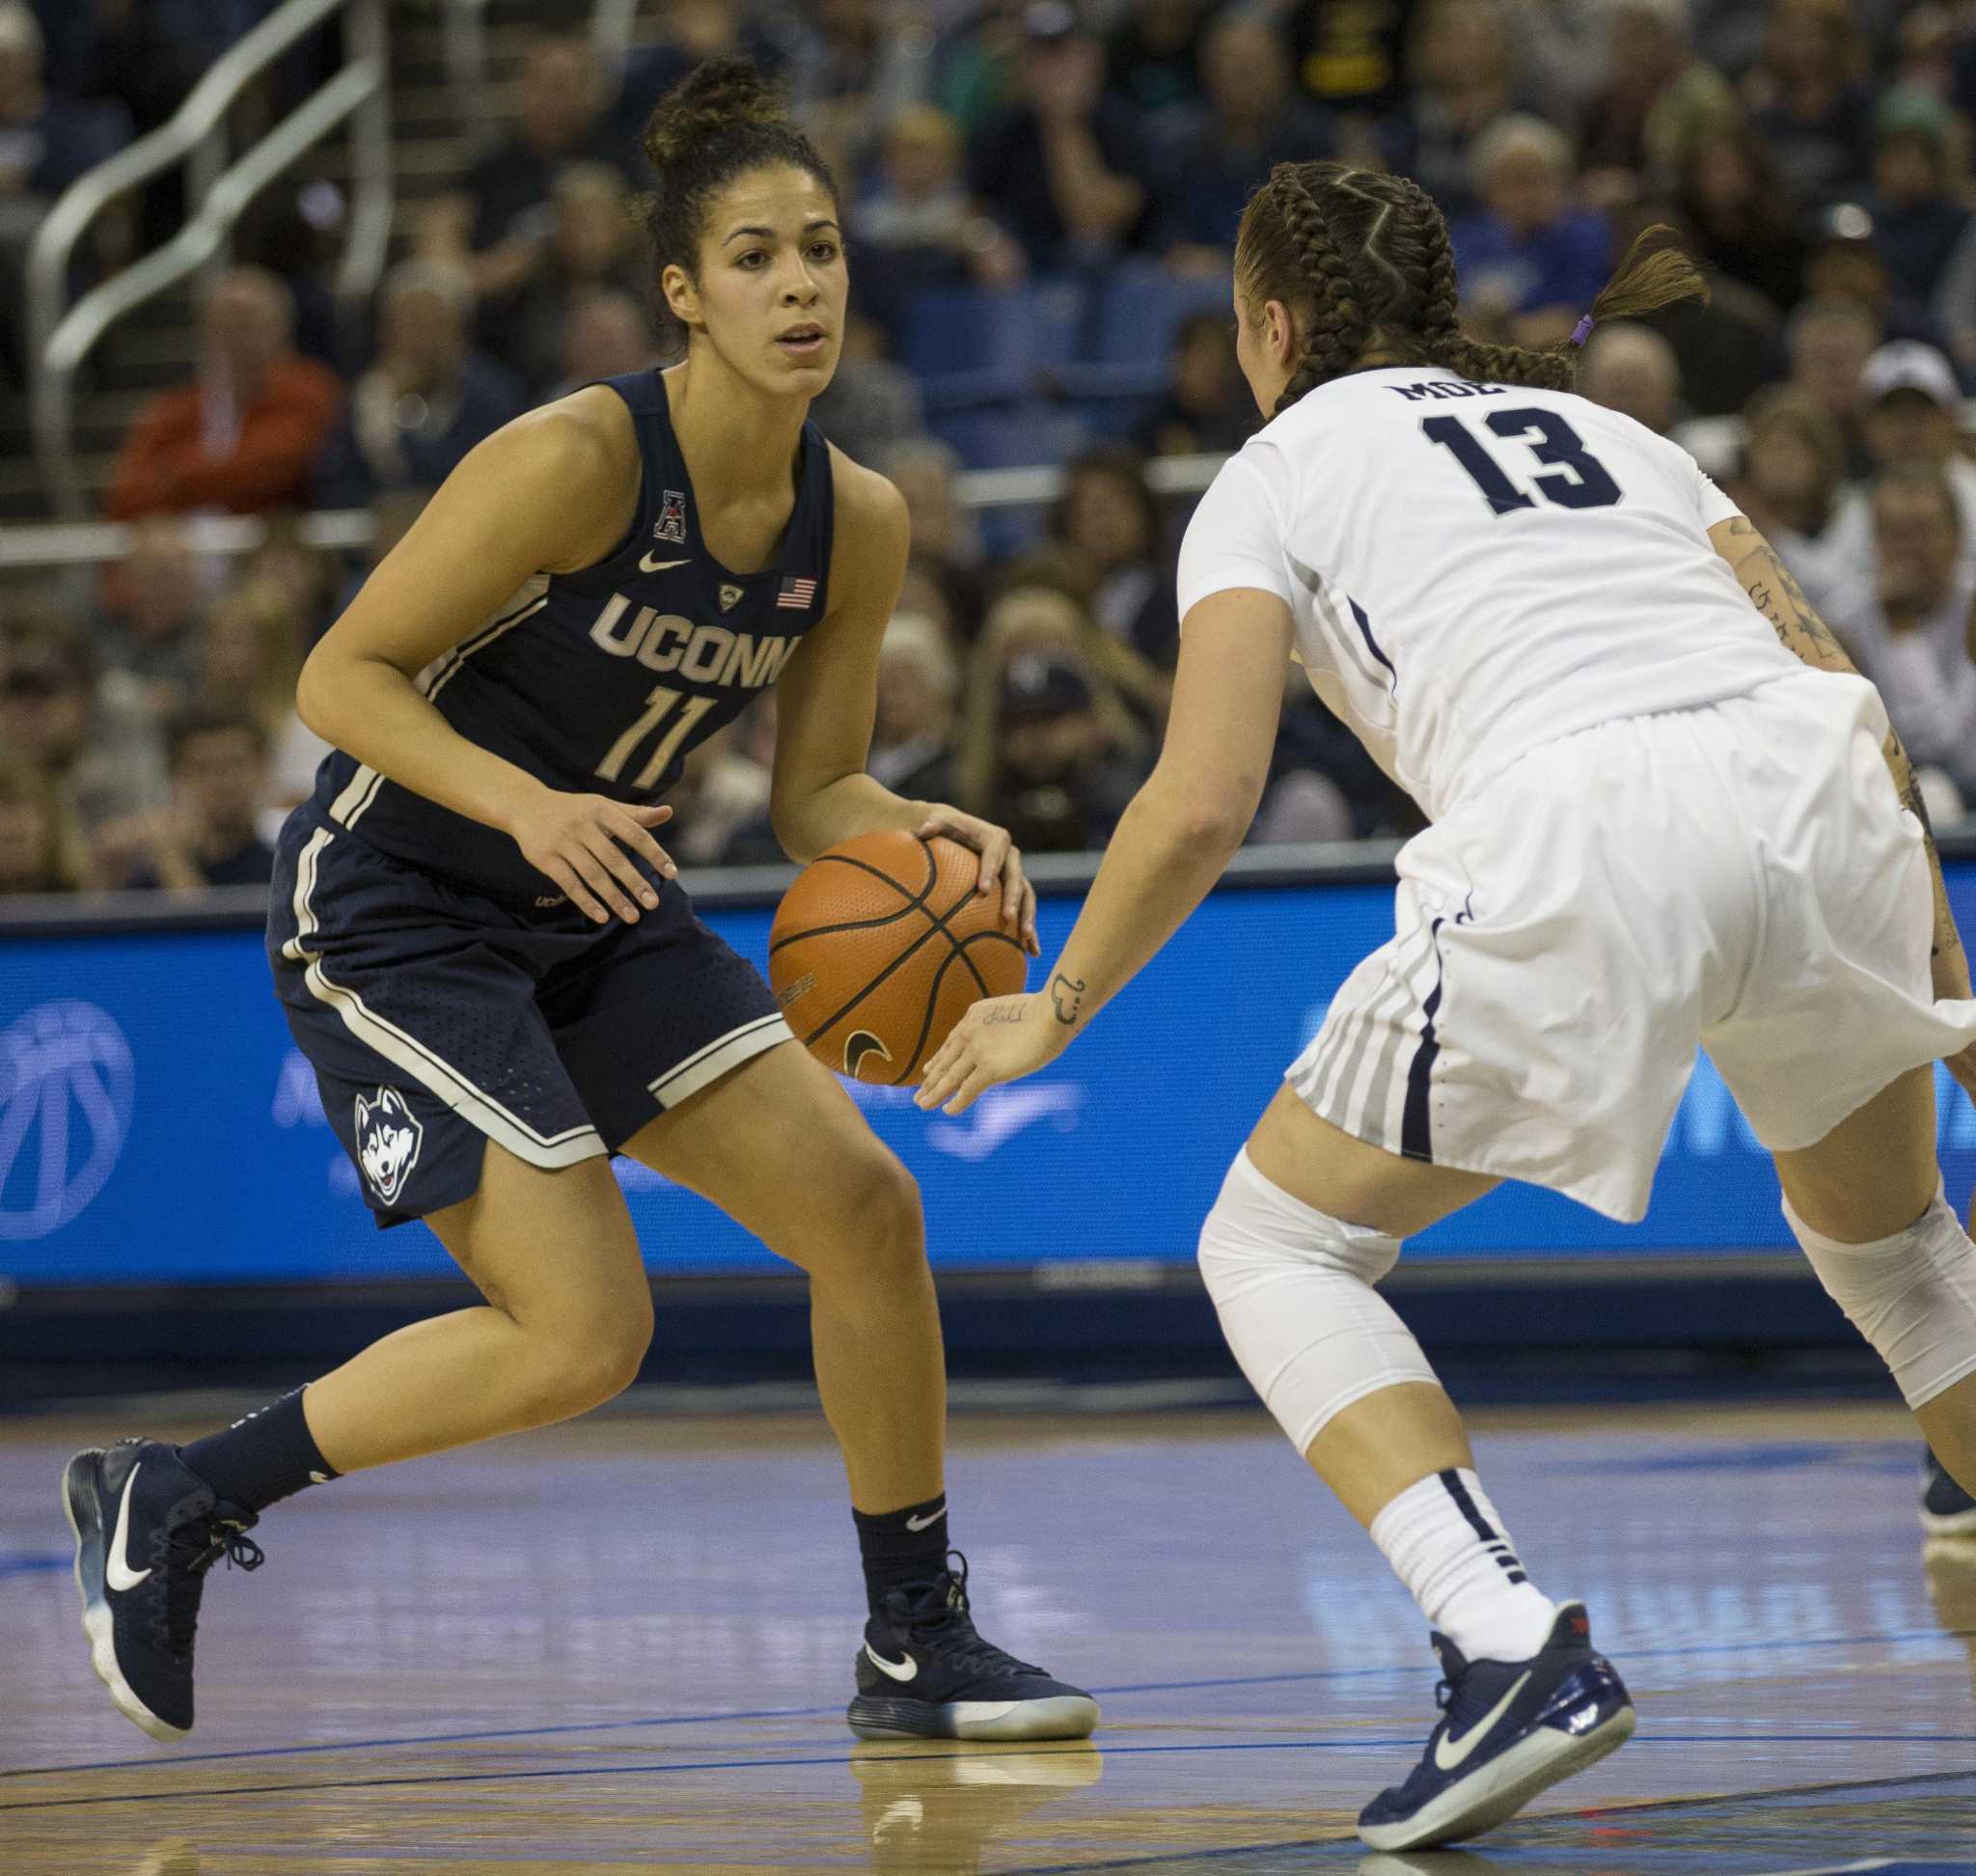 UConn's return to prominence has been a family affair